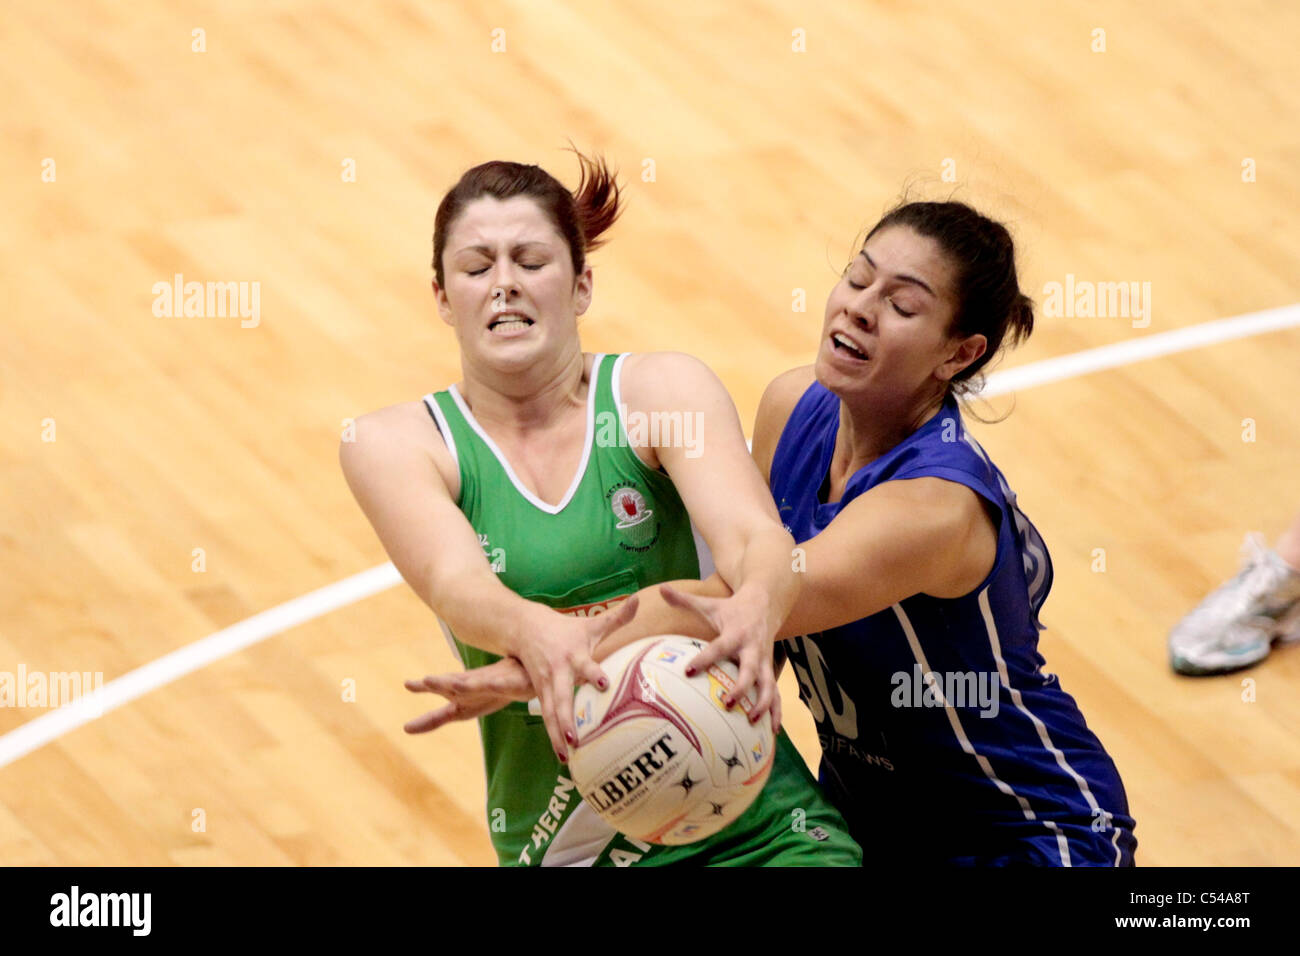 06.07.2011 Kyla Bowman of Northern Ireland(left) battles with Sanonu Robertson for the ball during the Pool A match between Northern Ireland VS Samoa, Mission Foods World Netball Championships 2011 from the Singapore Indoor Stadium in Singapore. Stock Photo